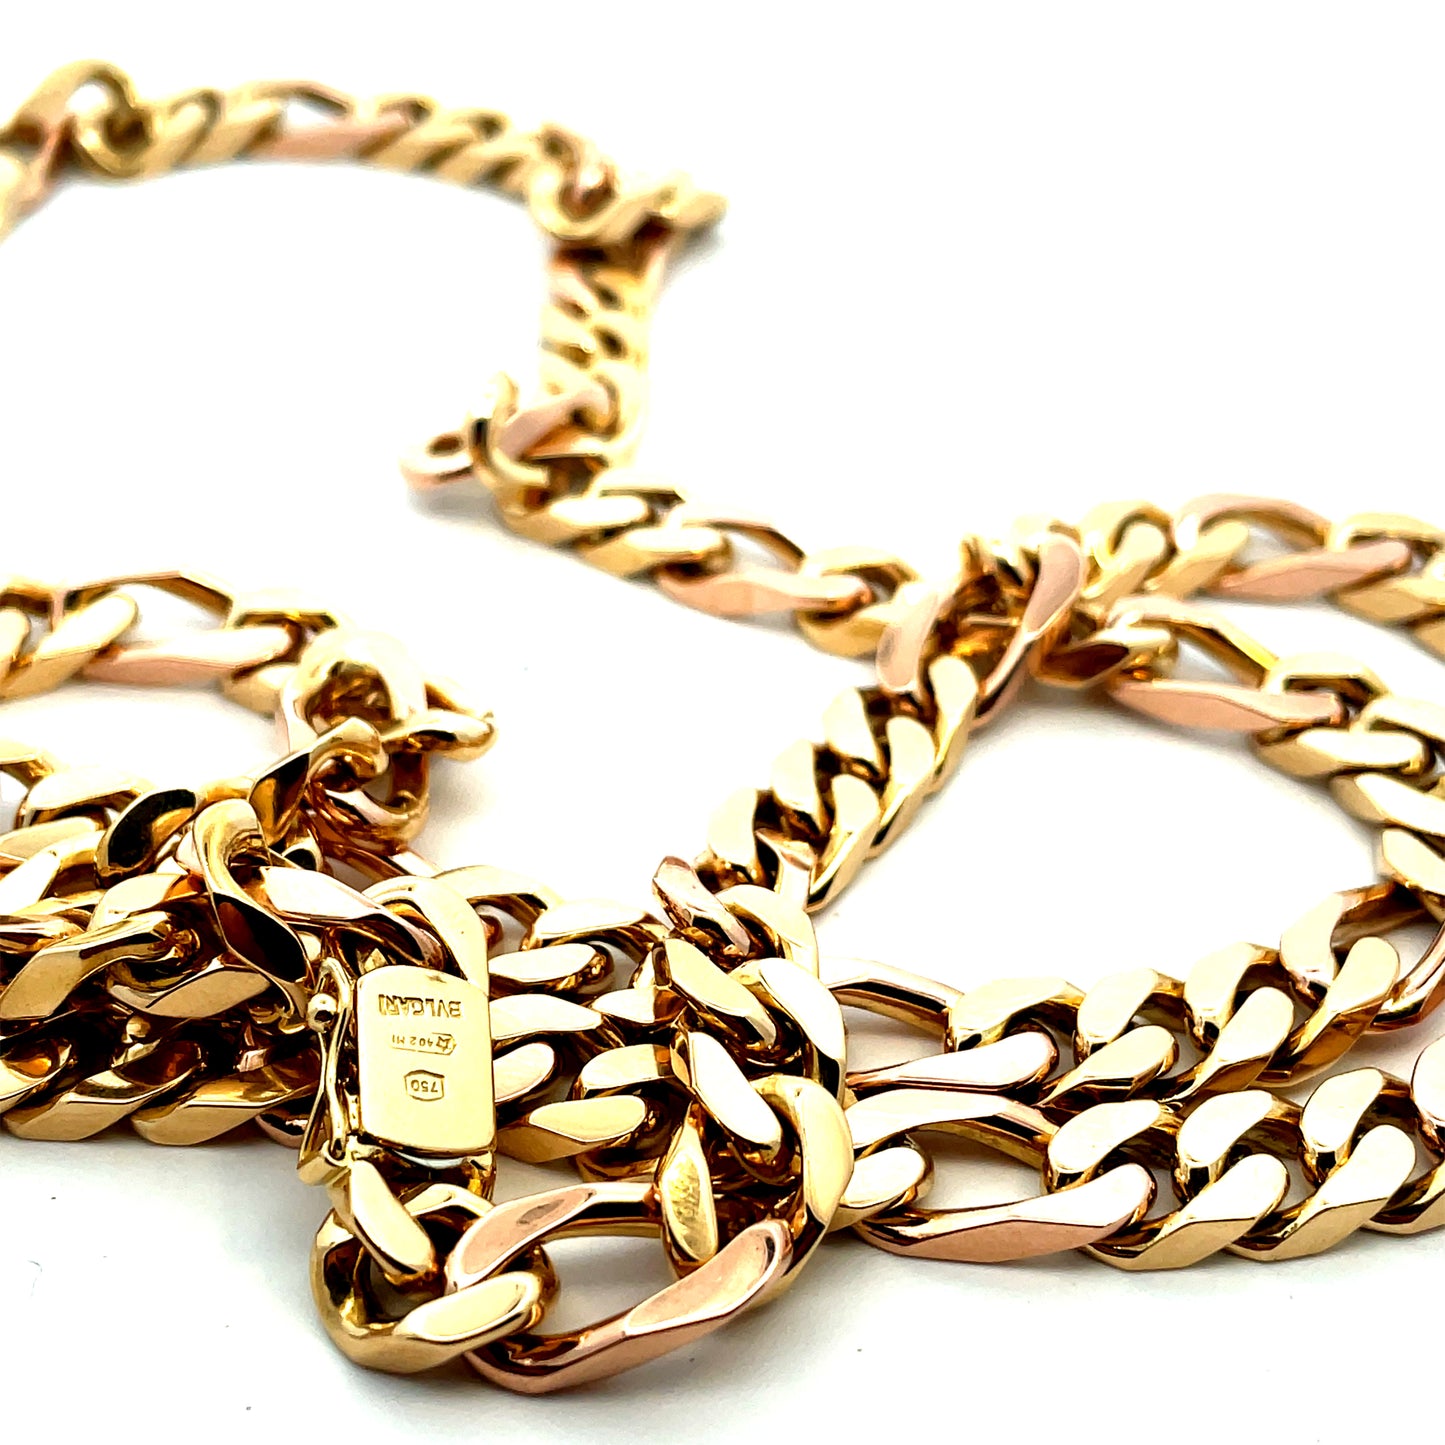 Bulgari 1970s 18KT Yellow Gold Long Chain Necklace close-up details